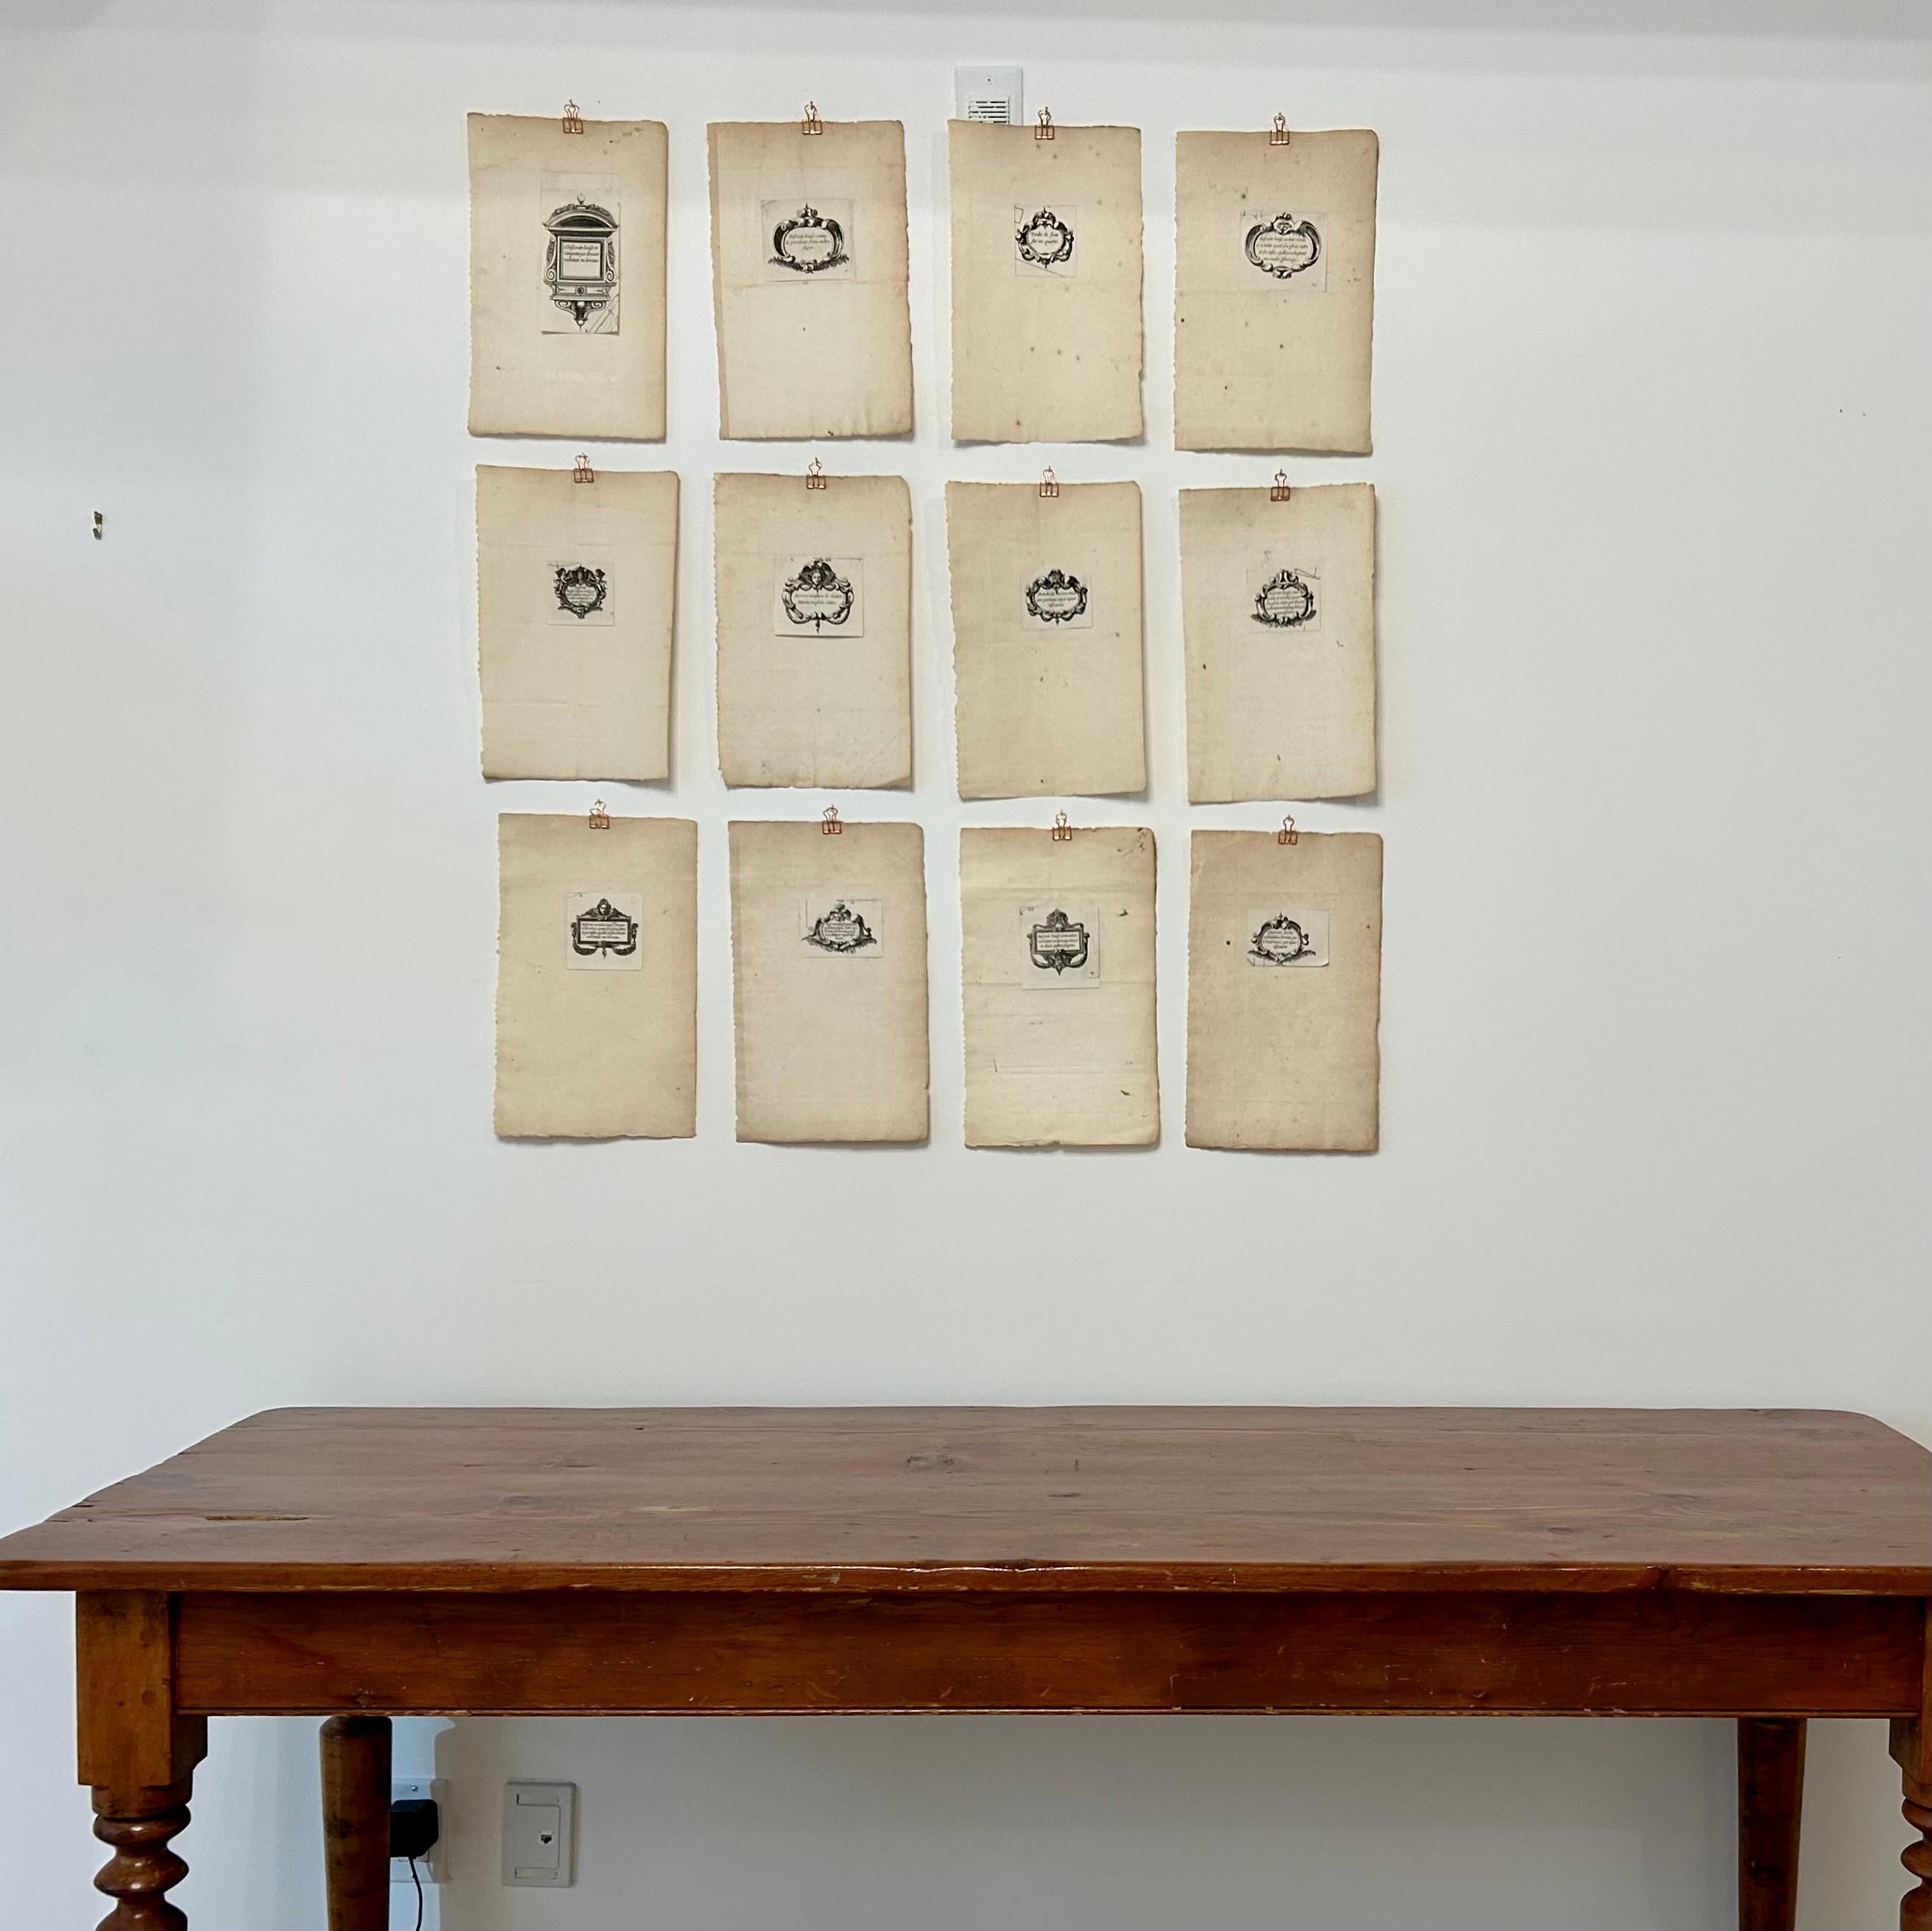 Set of twelve individual sheets with affixed printers' devices, each featuring individual designs along with wording in old french, dating from approximately 1700.
Printers' devices were created by the printers of books and engraved either on the